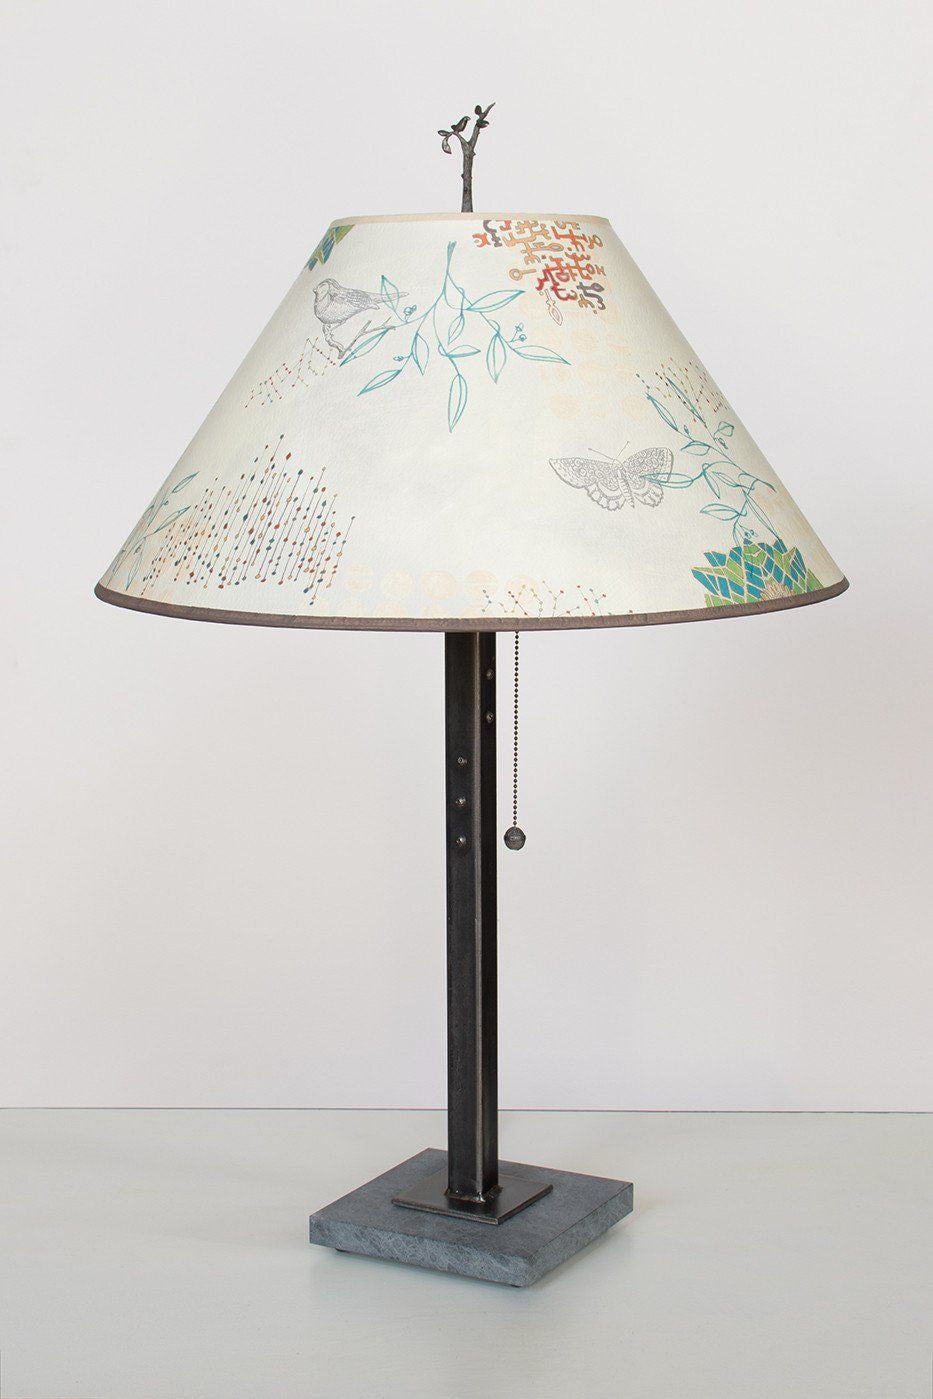 Janna Ugone & Co Table Lamps Steel Table Lamp with Large Conical Shade in Ecru Journey